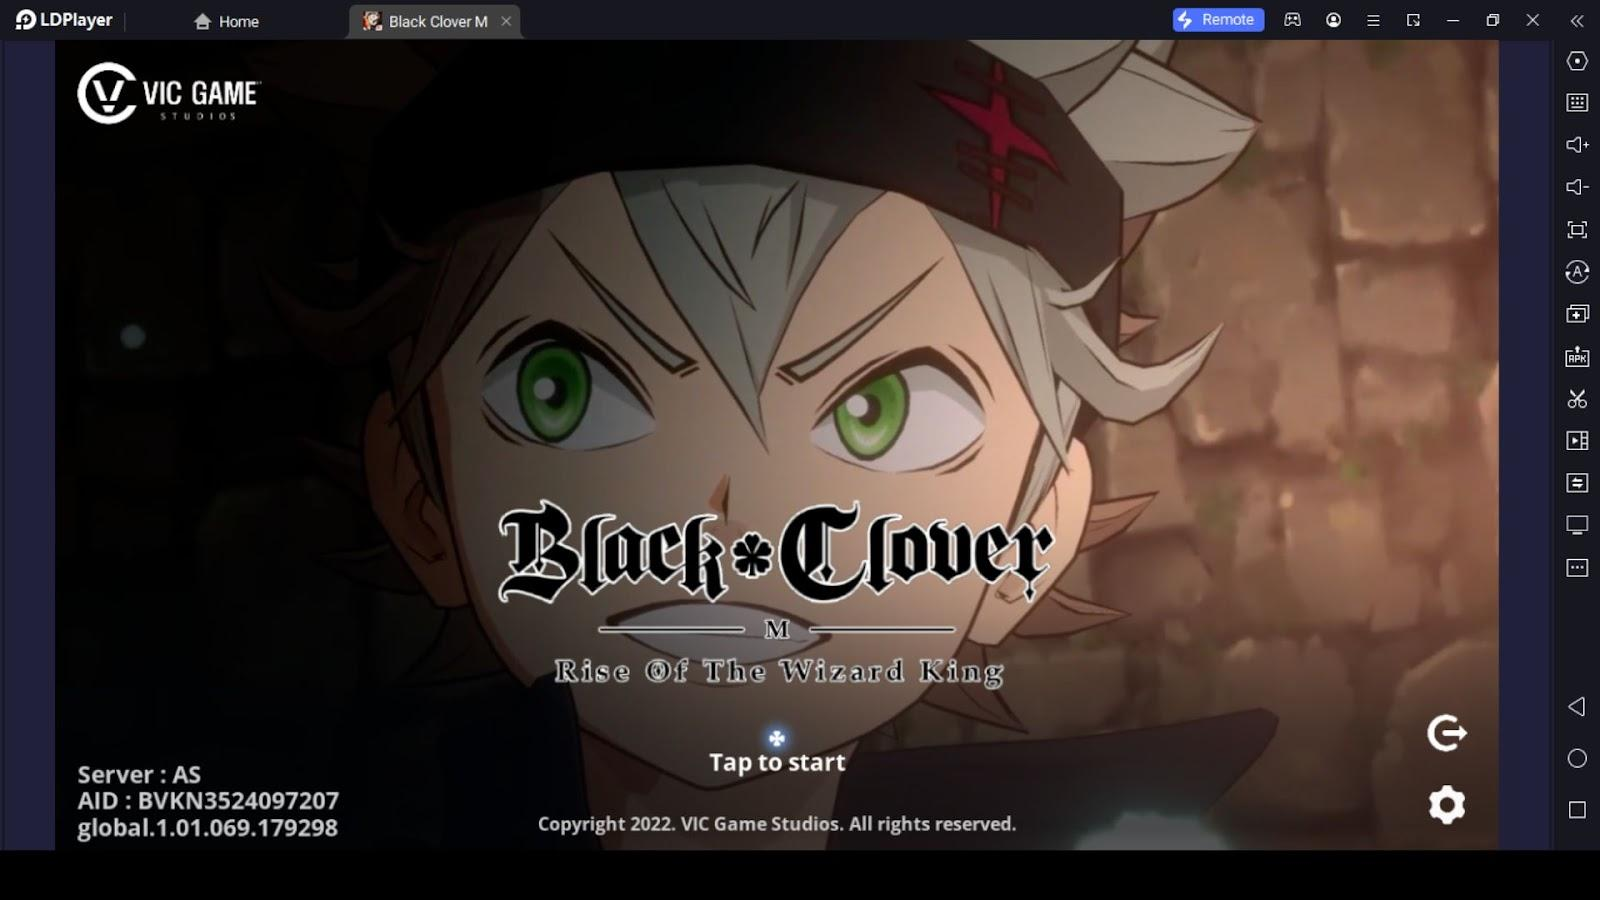 Black Clover M: What are the Best Teams to Farm Gears?